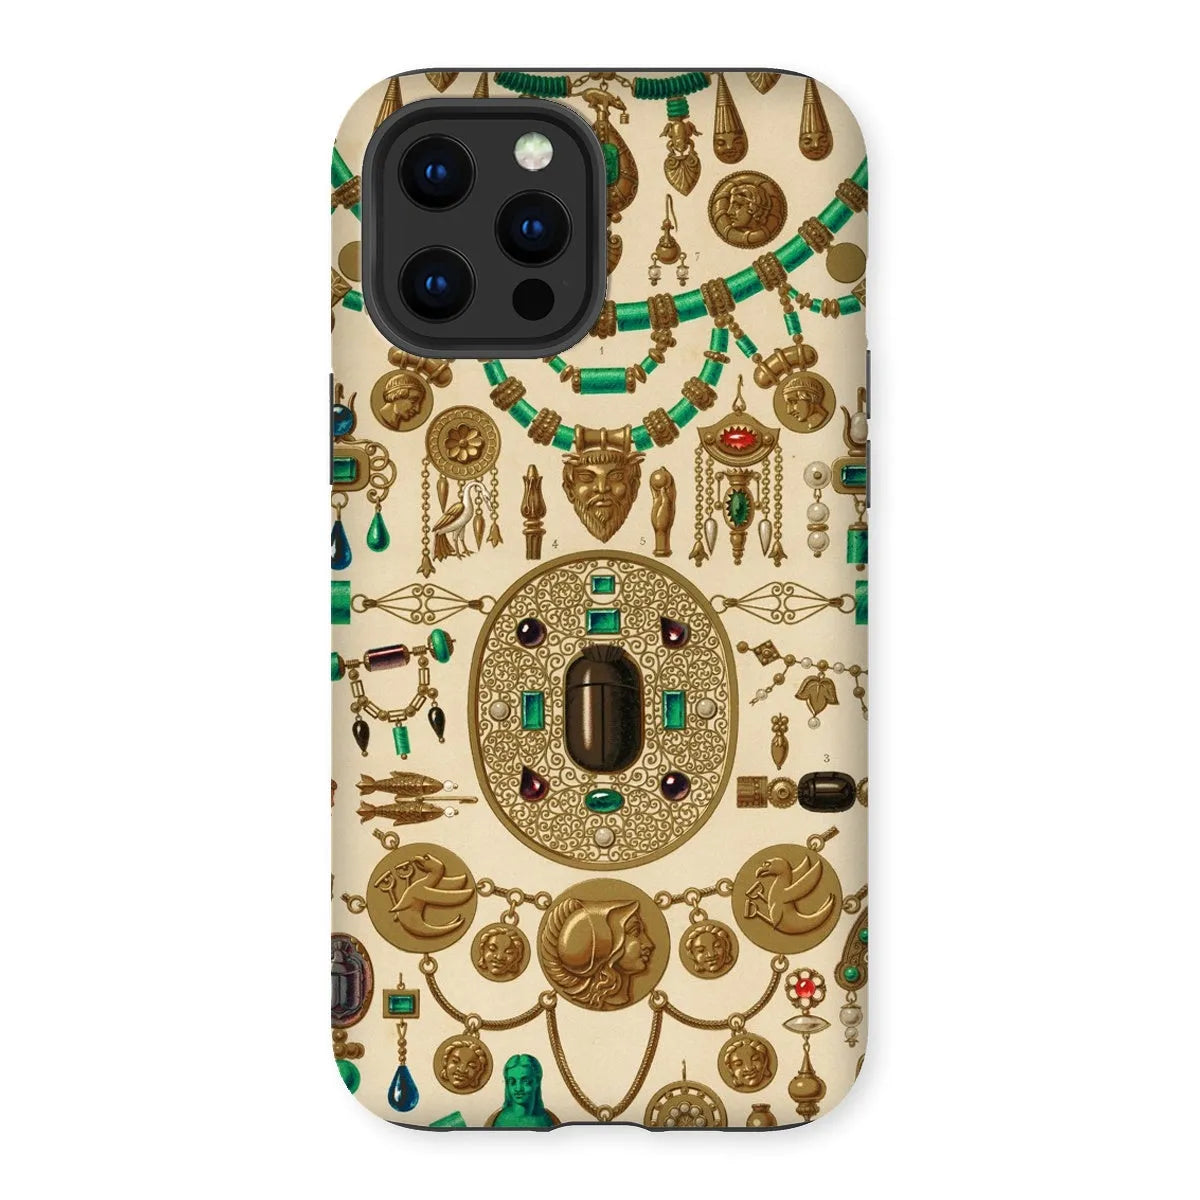 Etruscan Jewelry By Auguste Racinet Art Phone Case - Iphone 13 Pro Max / Matte - Mobile Phone Cases - Aesthetic Art